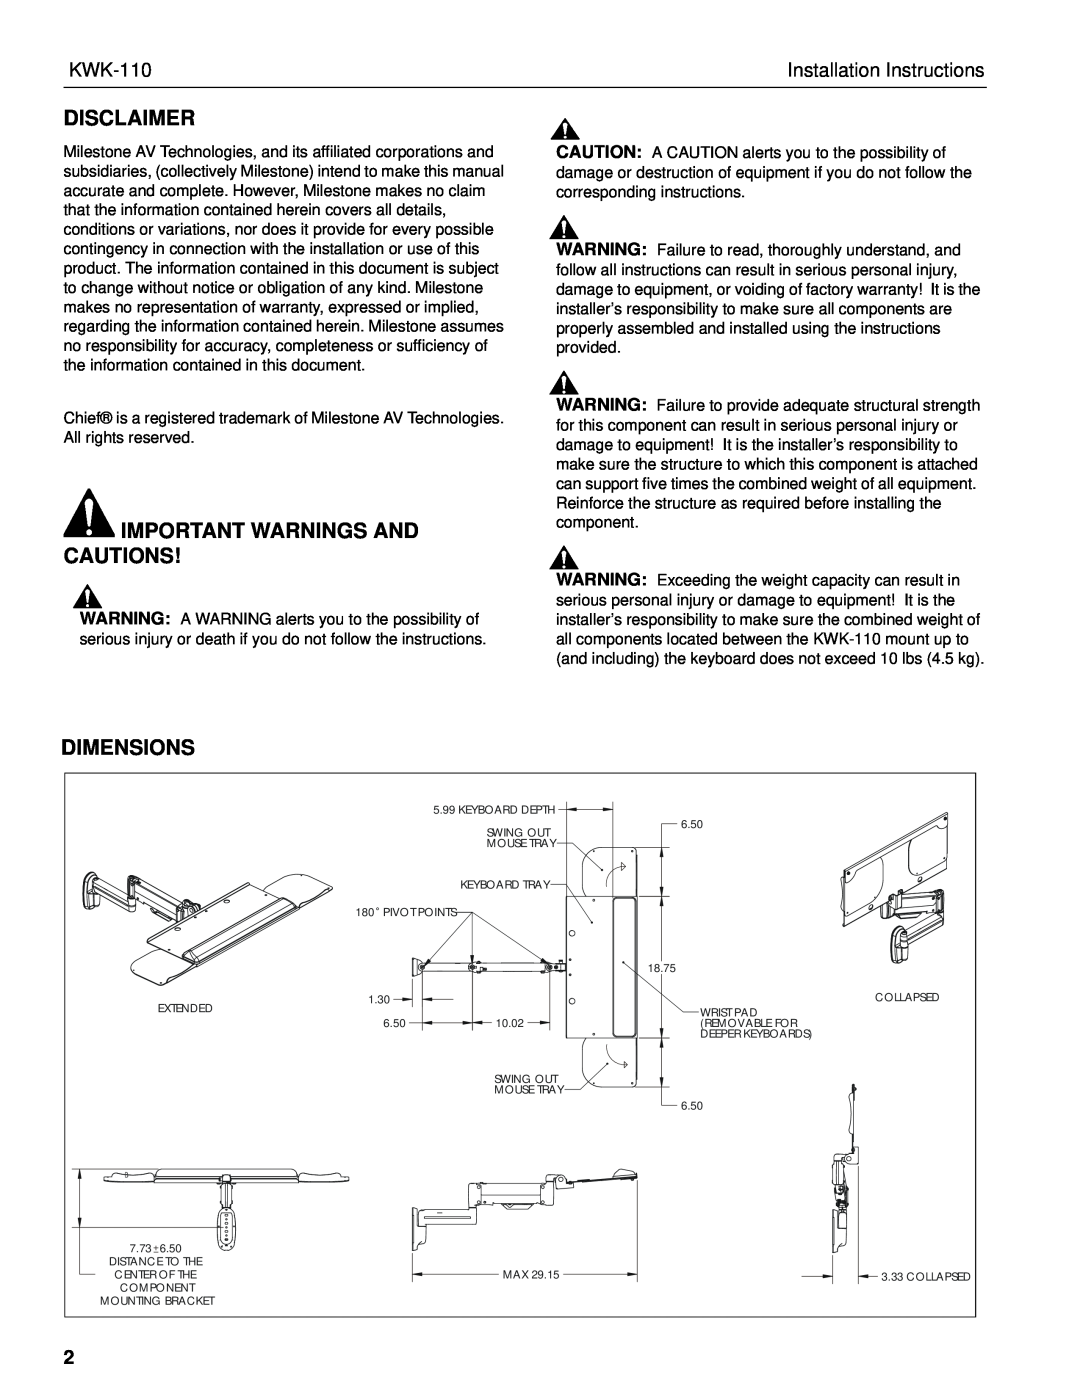 Chief Manufacturing KWK-110 Disclaimer, Important Warnings And Cautions, Installation Instructions, Dimensions 